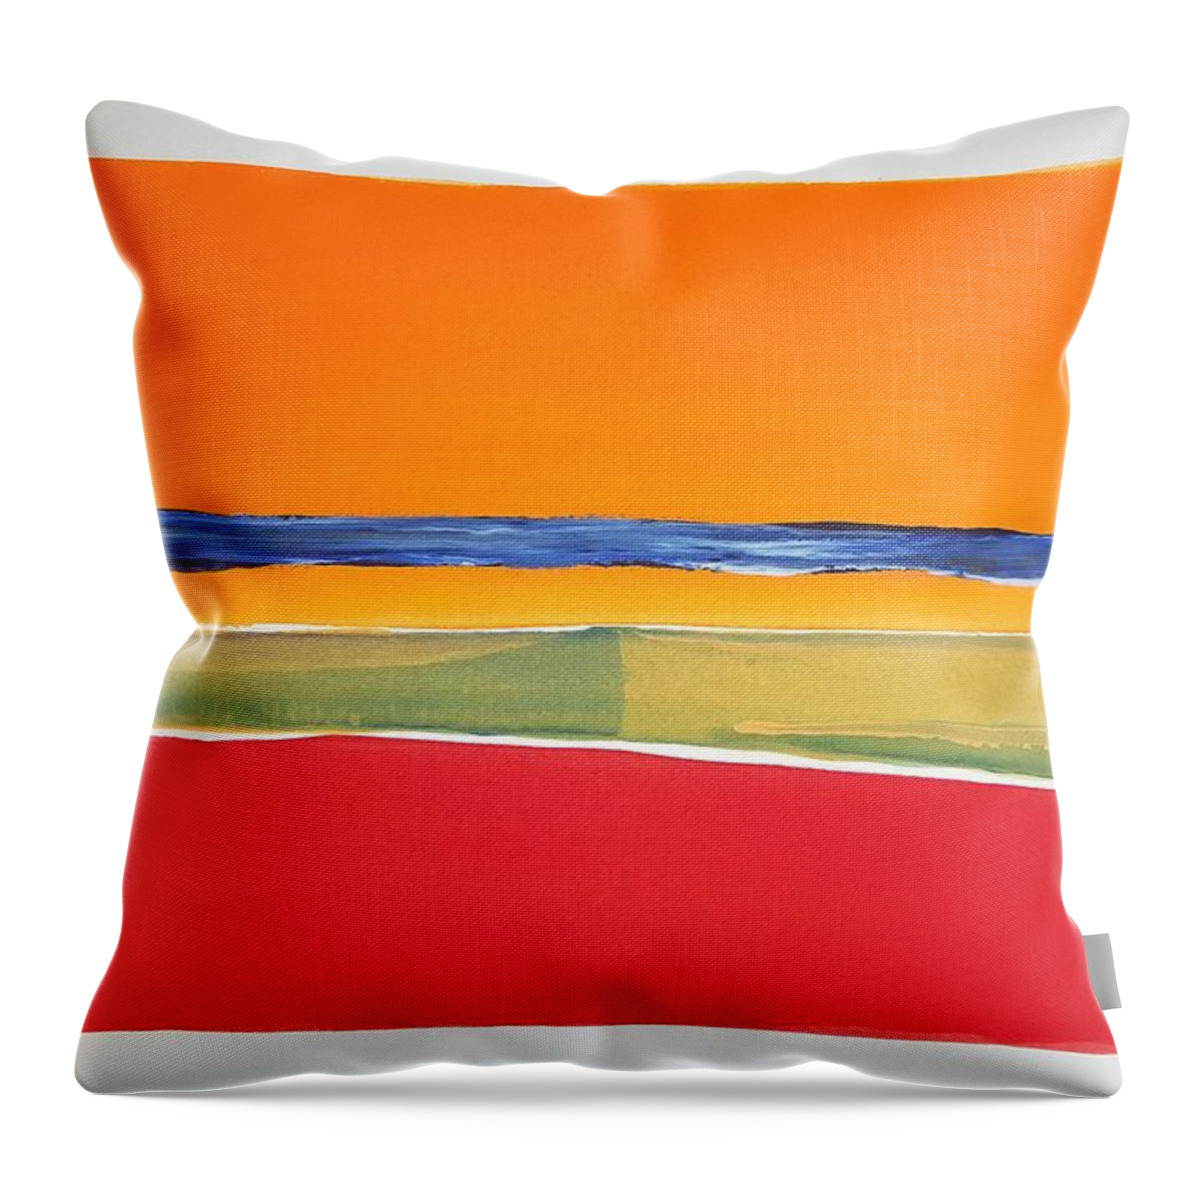 Watercolor Throw Pillow featuring the painting Prairie Fire by John Klobucher